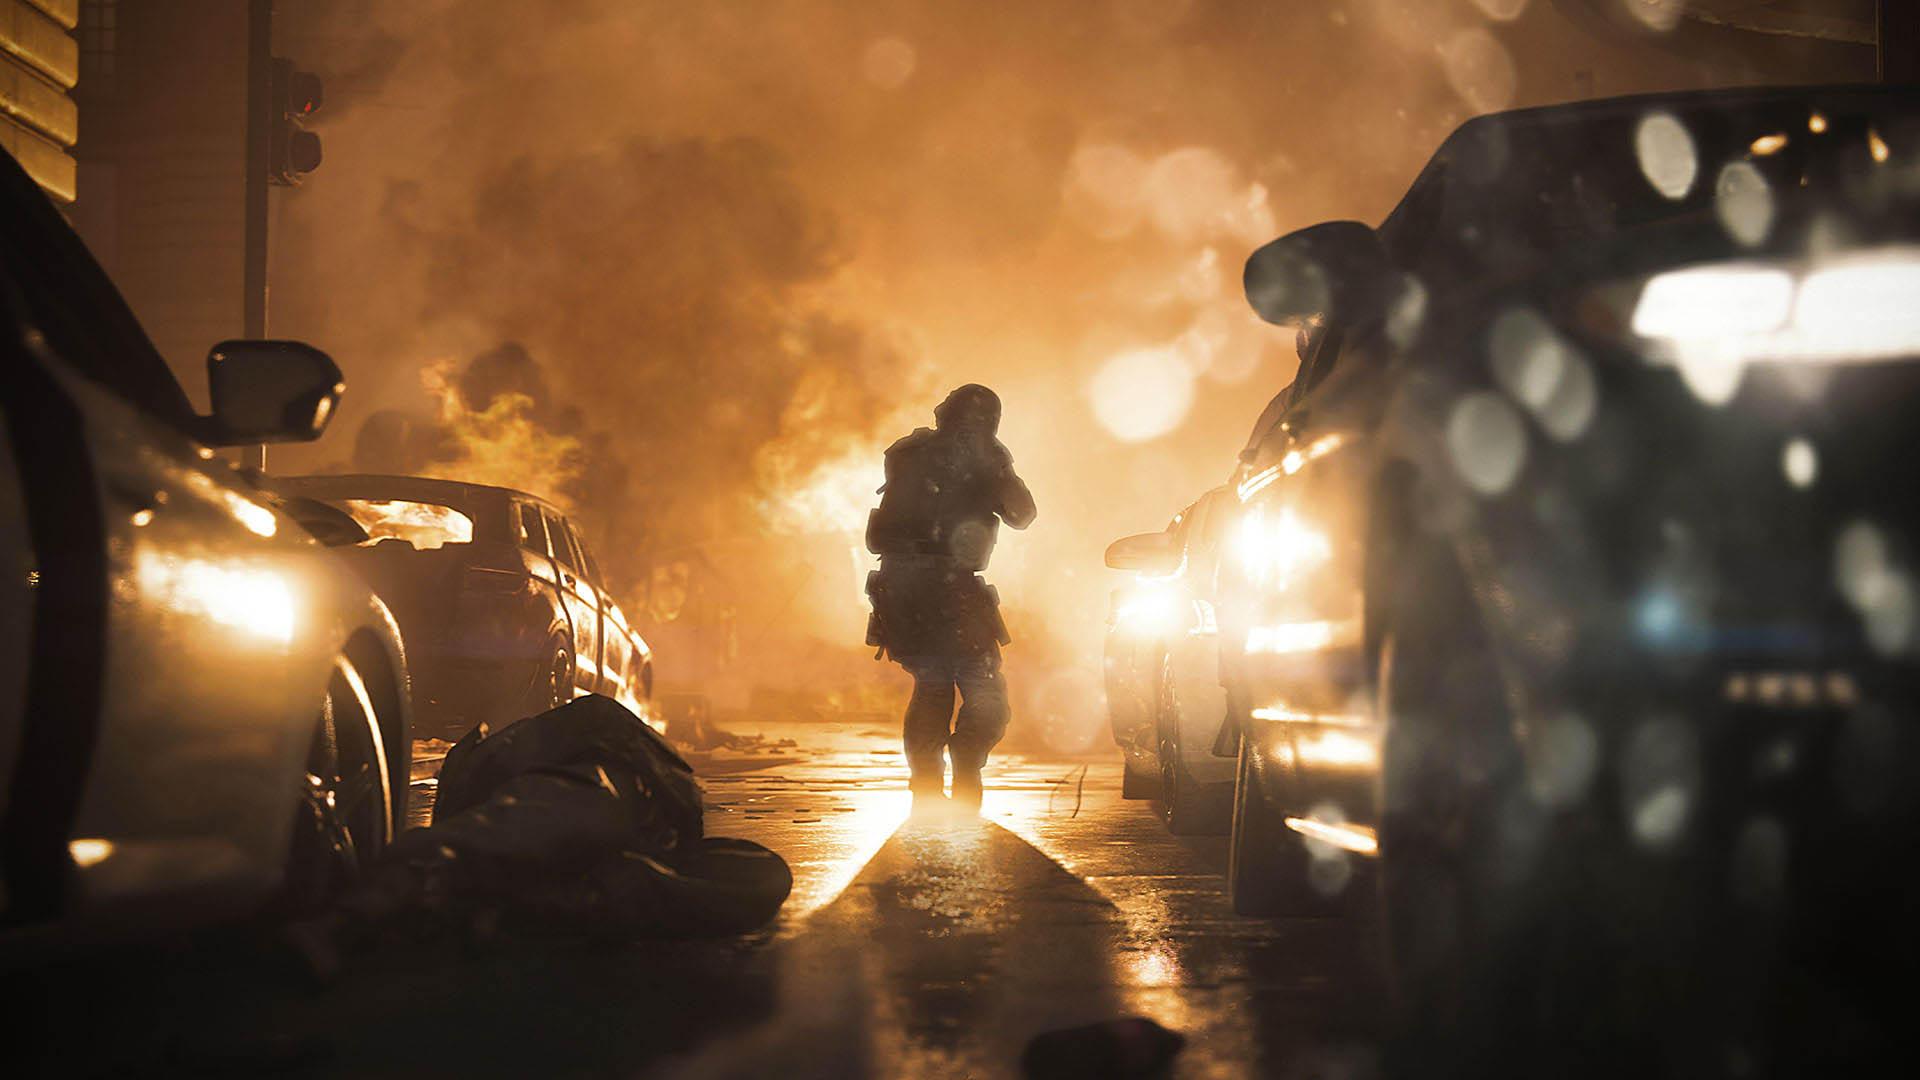 Call of Duty: Modern Warfare PC Requirements are Modest, But You'll Need a  Ton of Storage